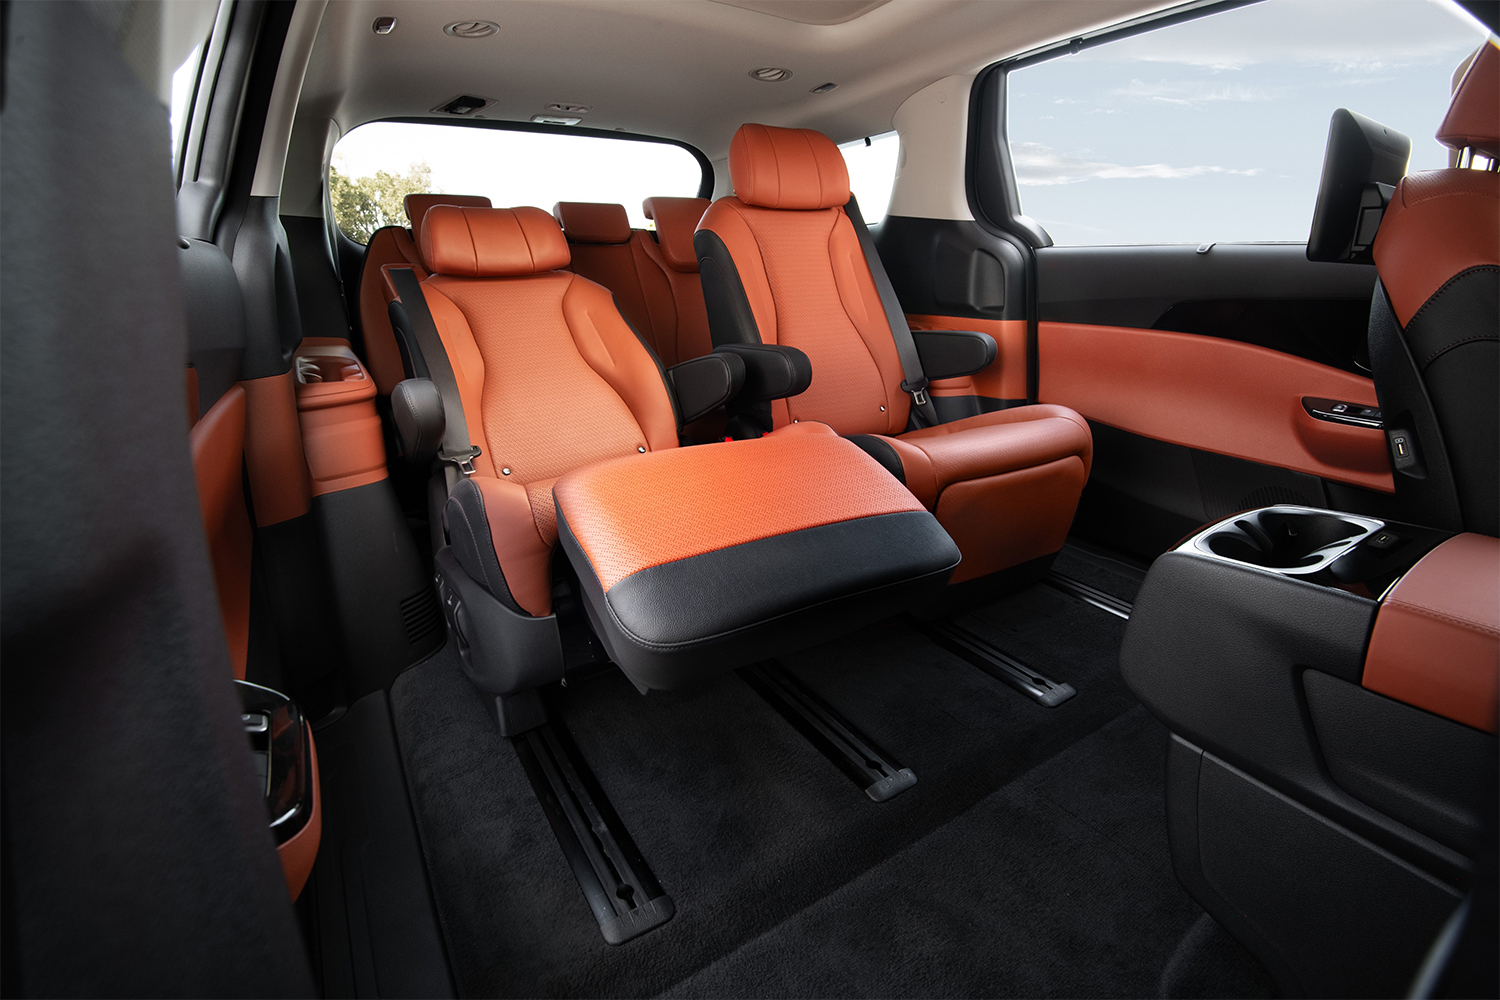 The second-row seats in the 2022 Kia Carnival SX Prestige, with one of the two captain's chairs reclining